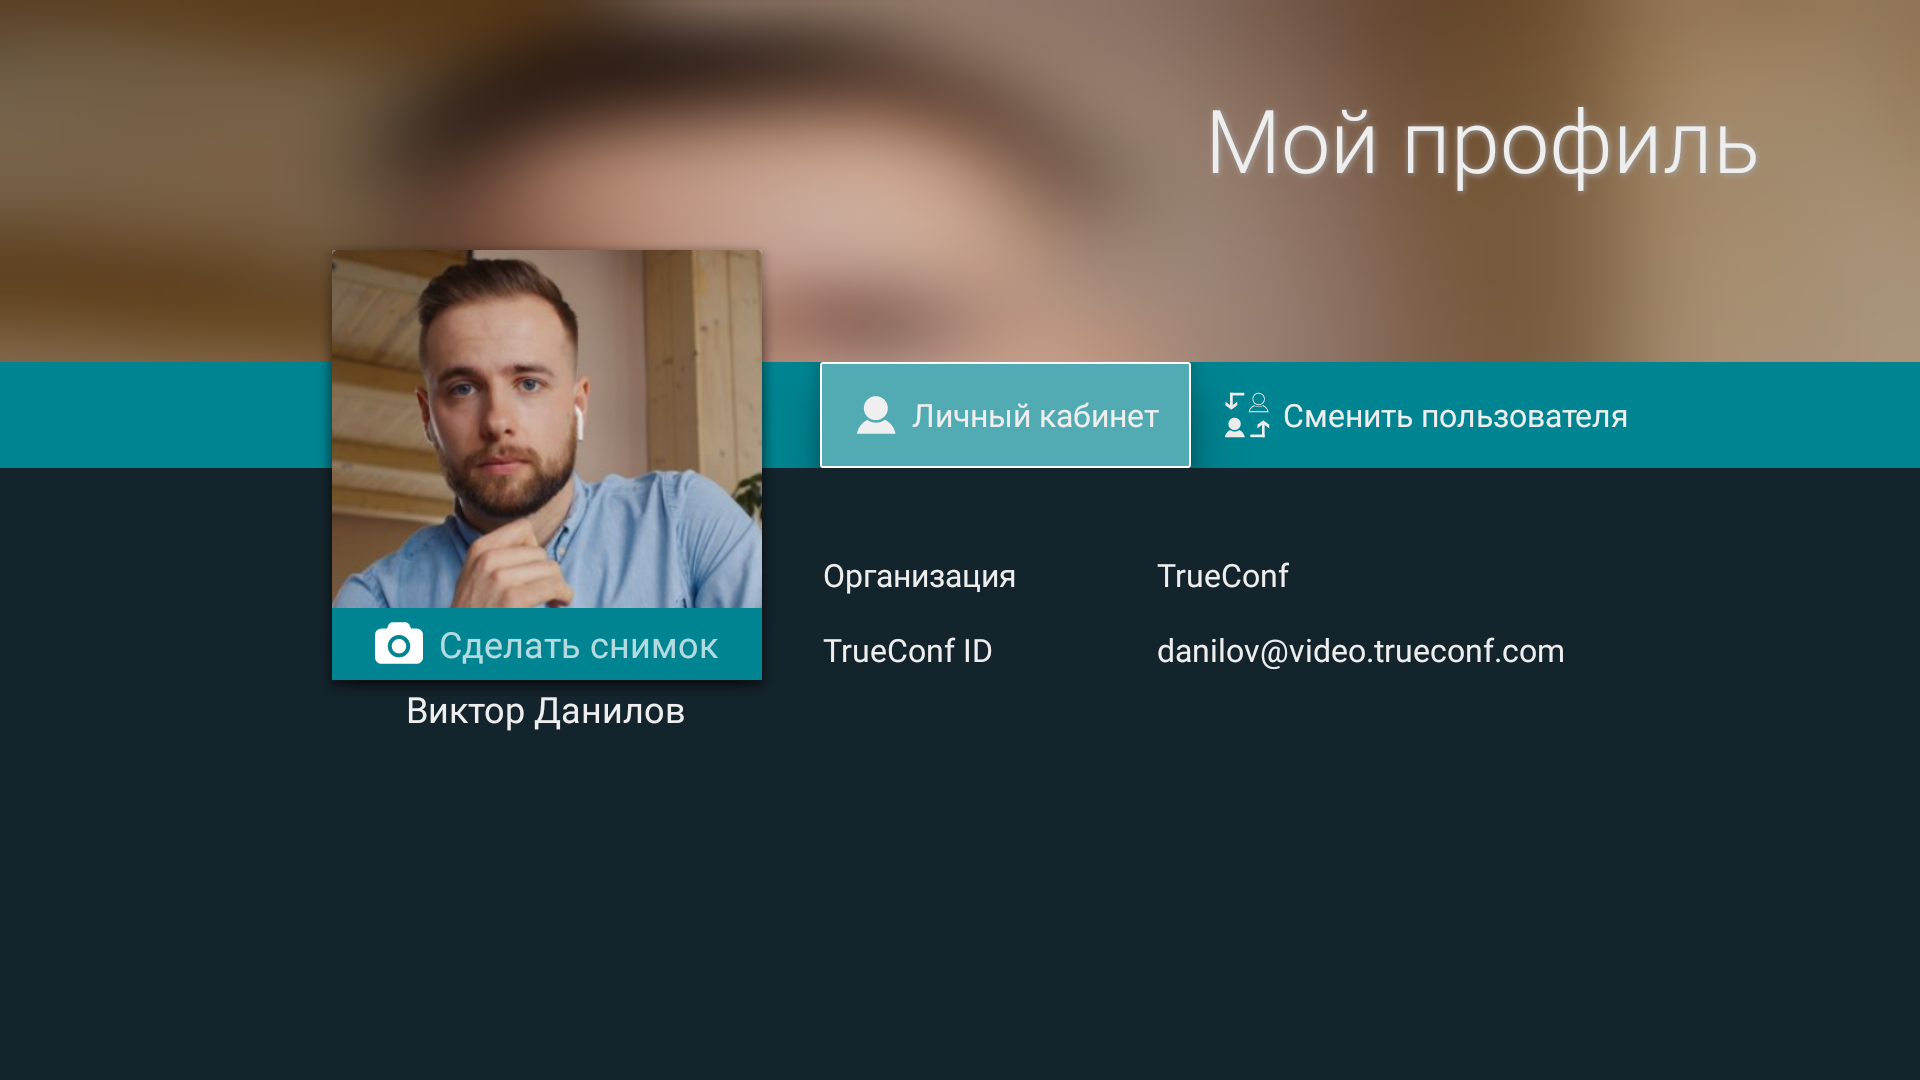 /client-android-tv/media/view_profile/ru.png